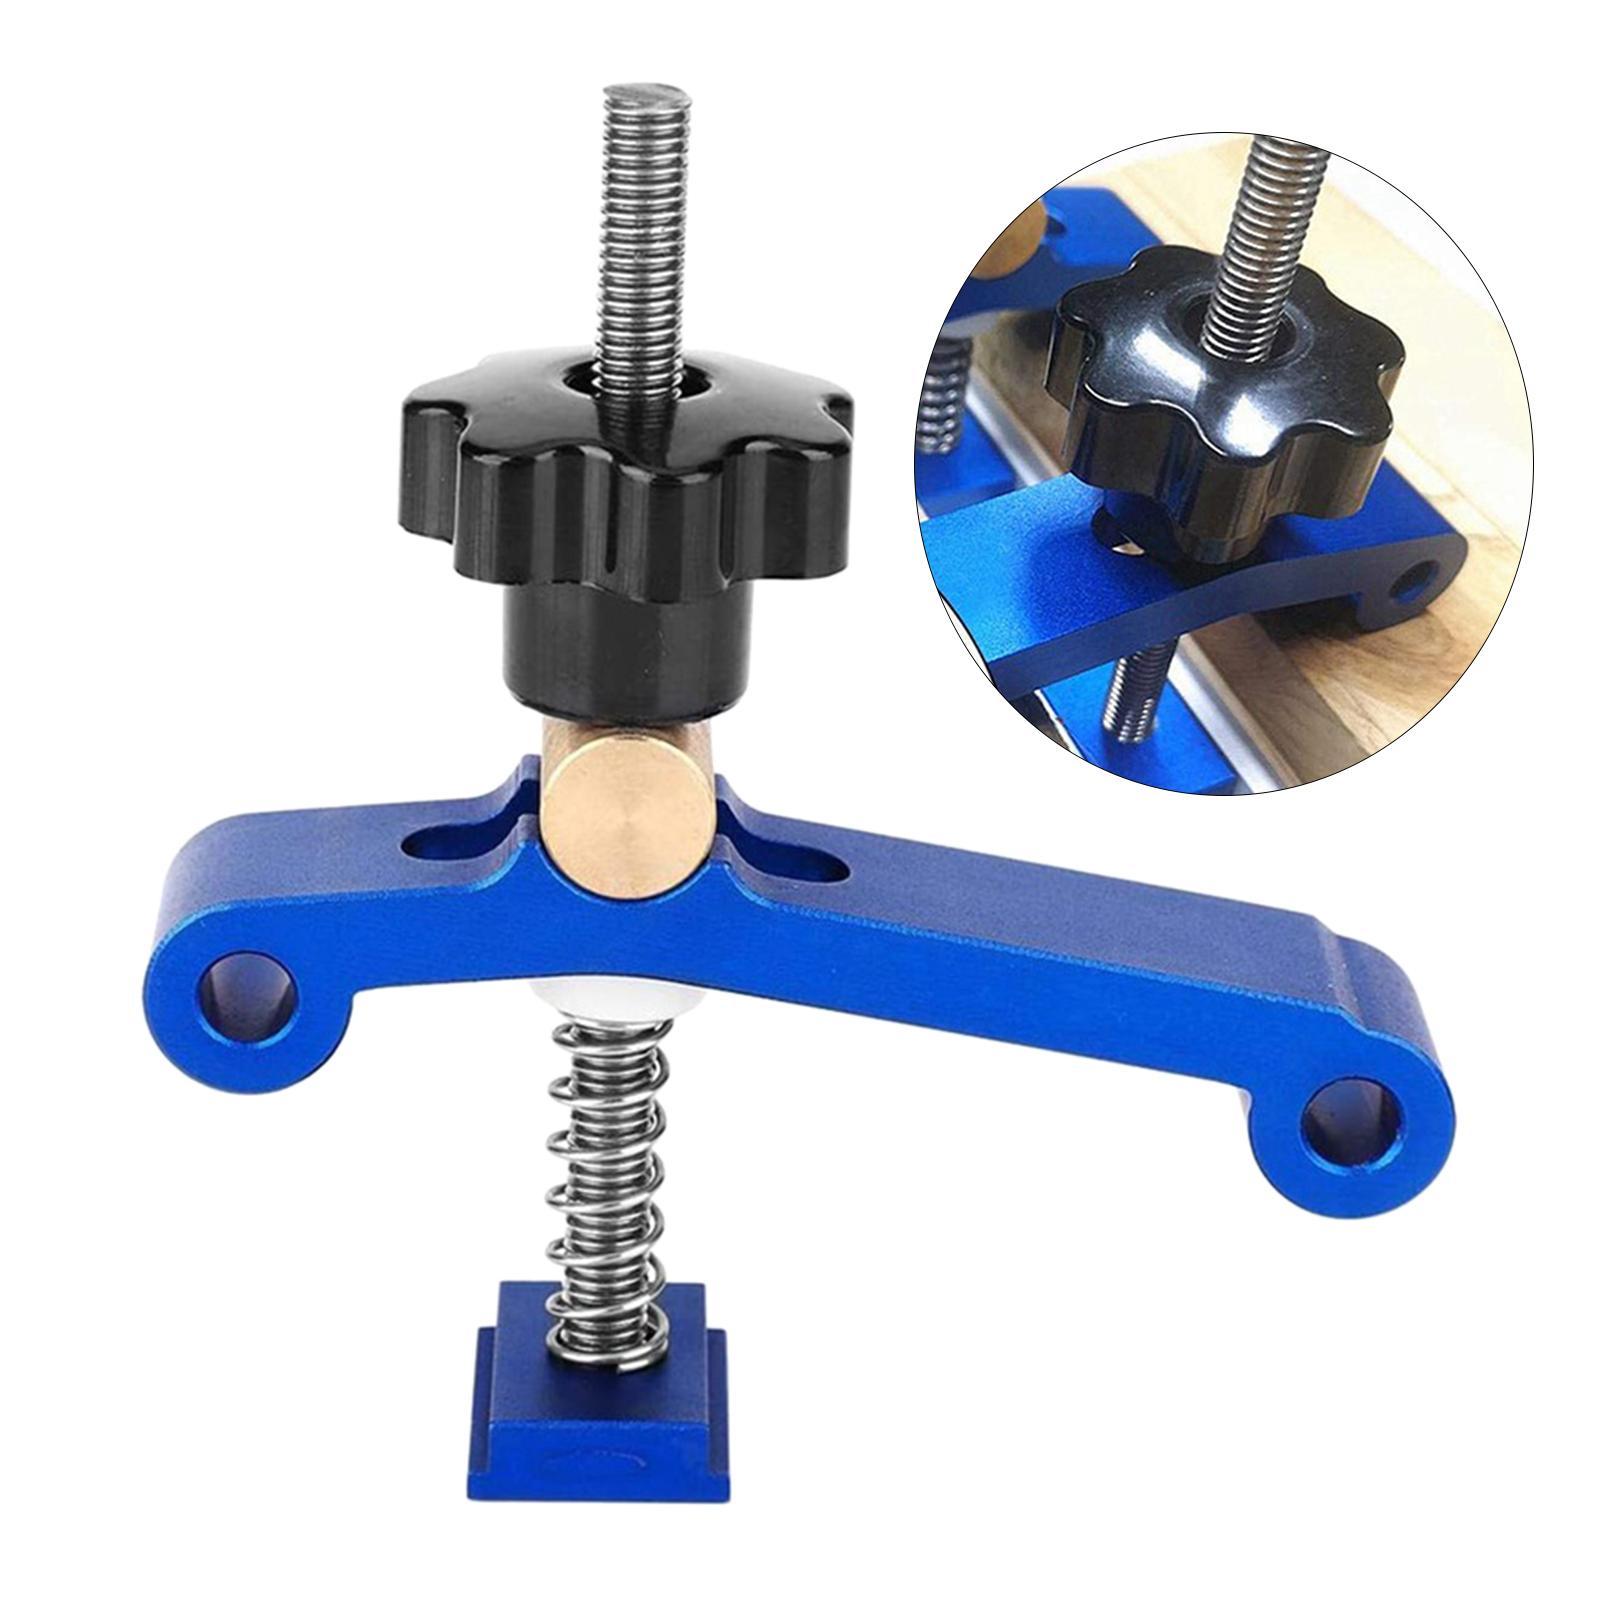 Hold Down Clamp Metal Quick Acting Set Useful for T-Slot T-Track Woodworking Tool Metalworking Supplies